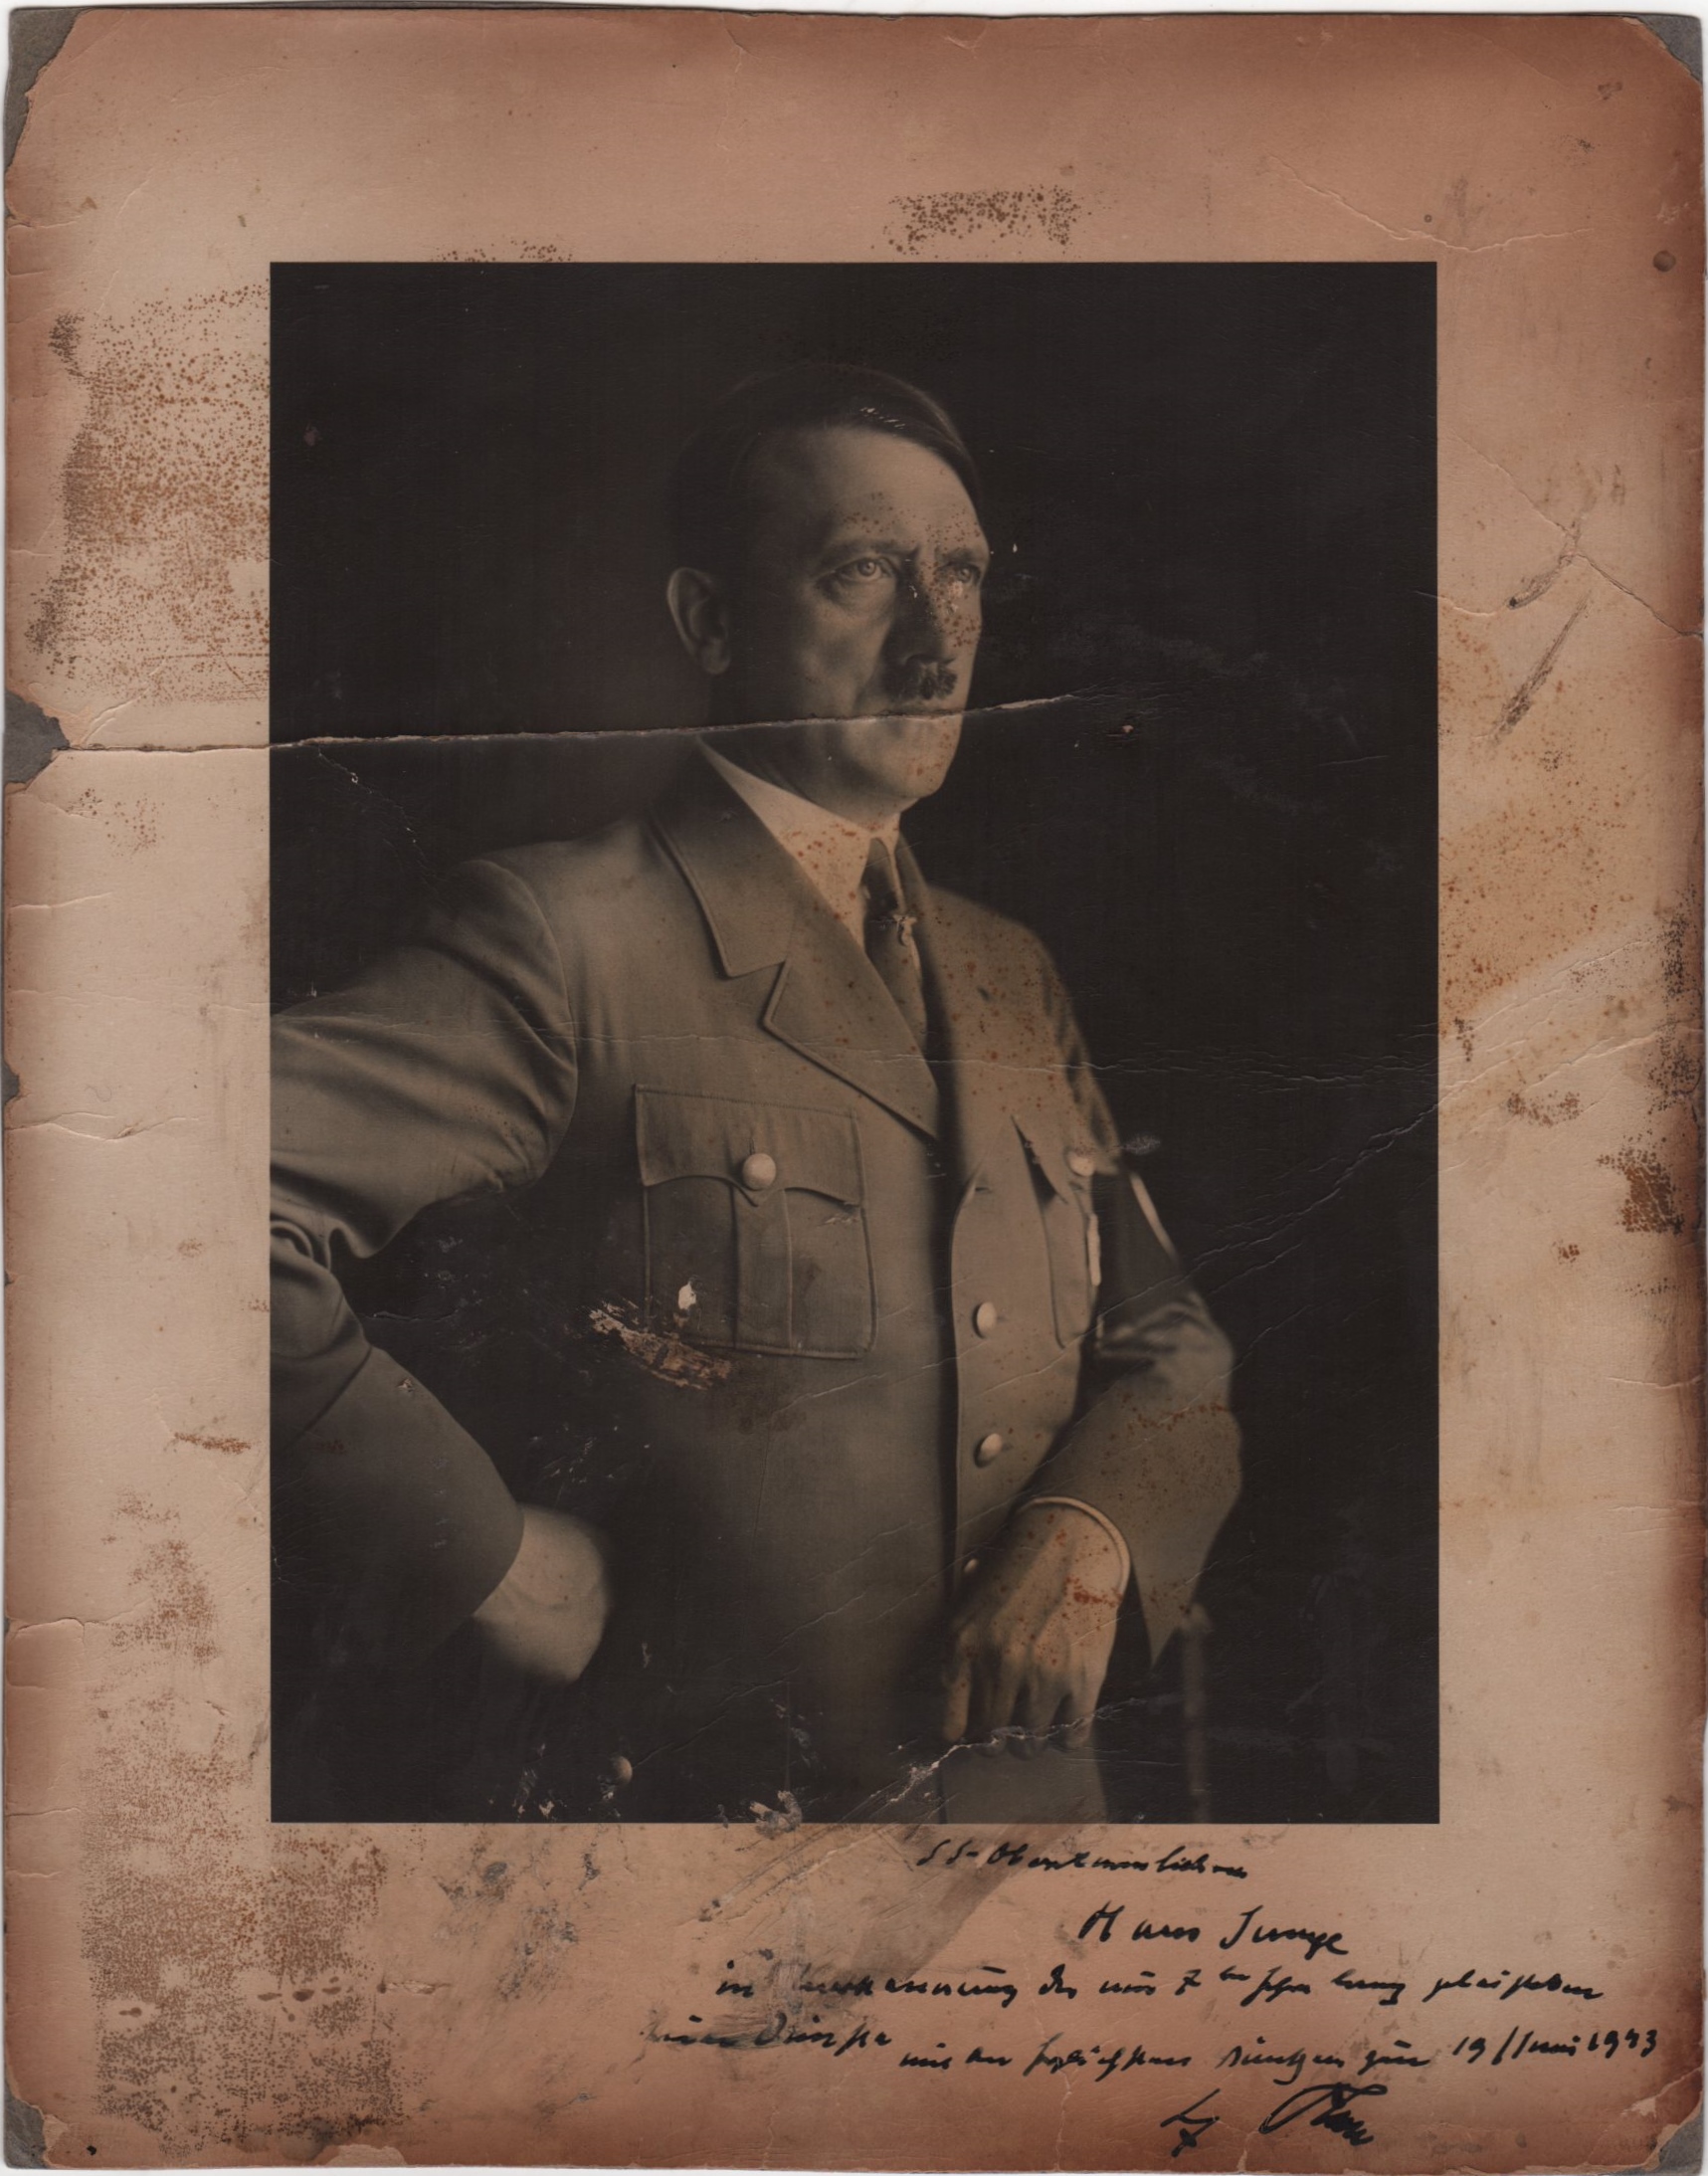 HITLER ADOLF: (1889-1945) Fuhrer of the Third Reich 1933-45. Signed and inscribed 8.